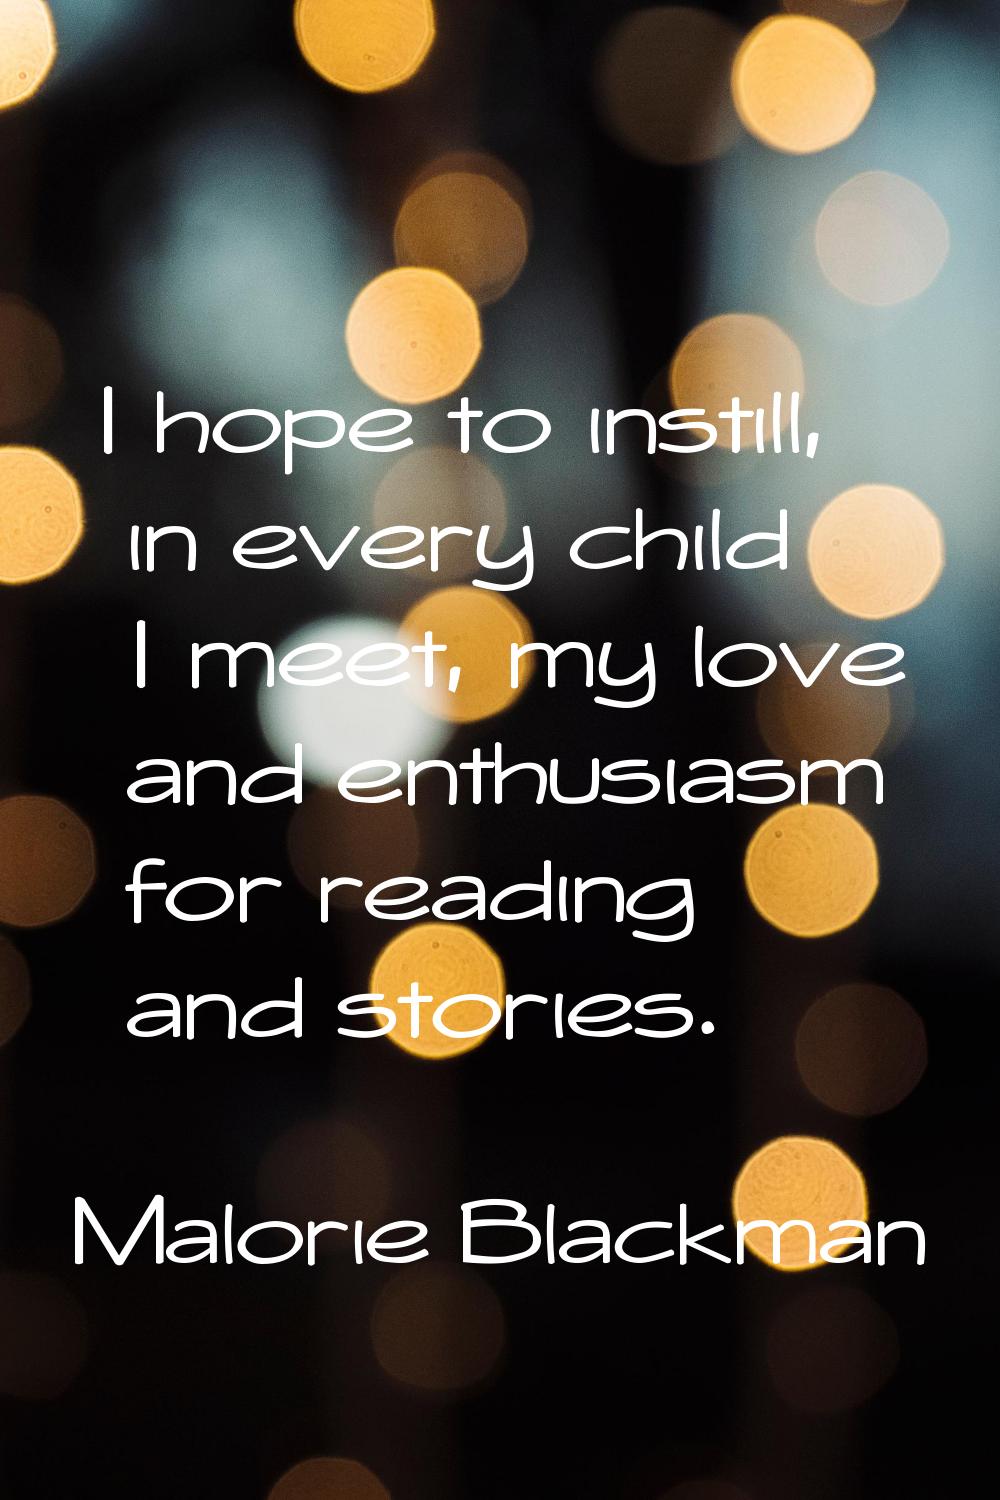 I hope to instill, in every child I meet, my love and enthusiasm for reading and stories.